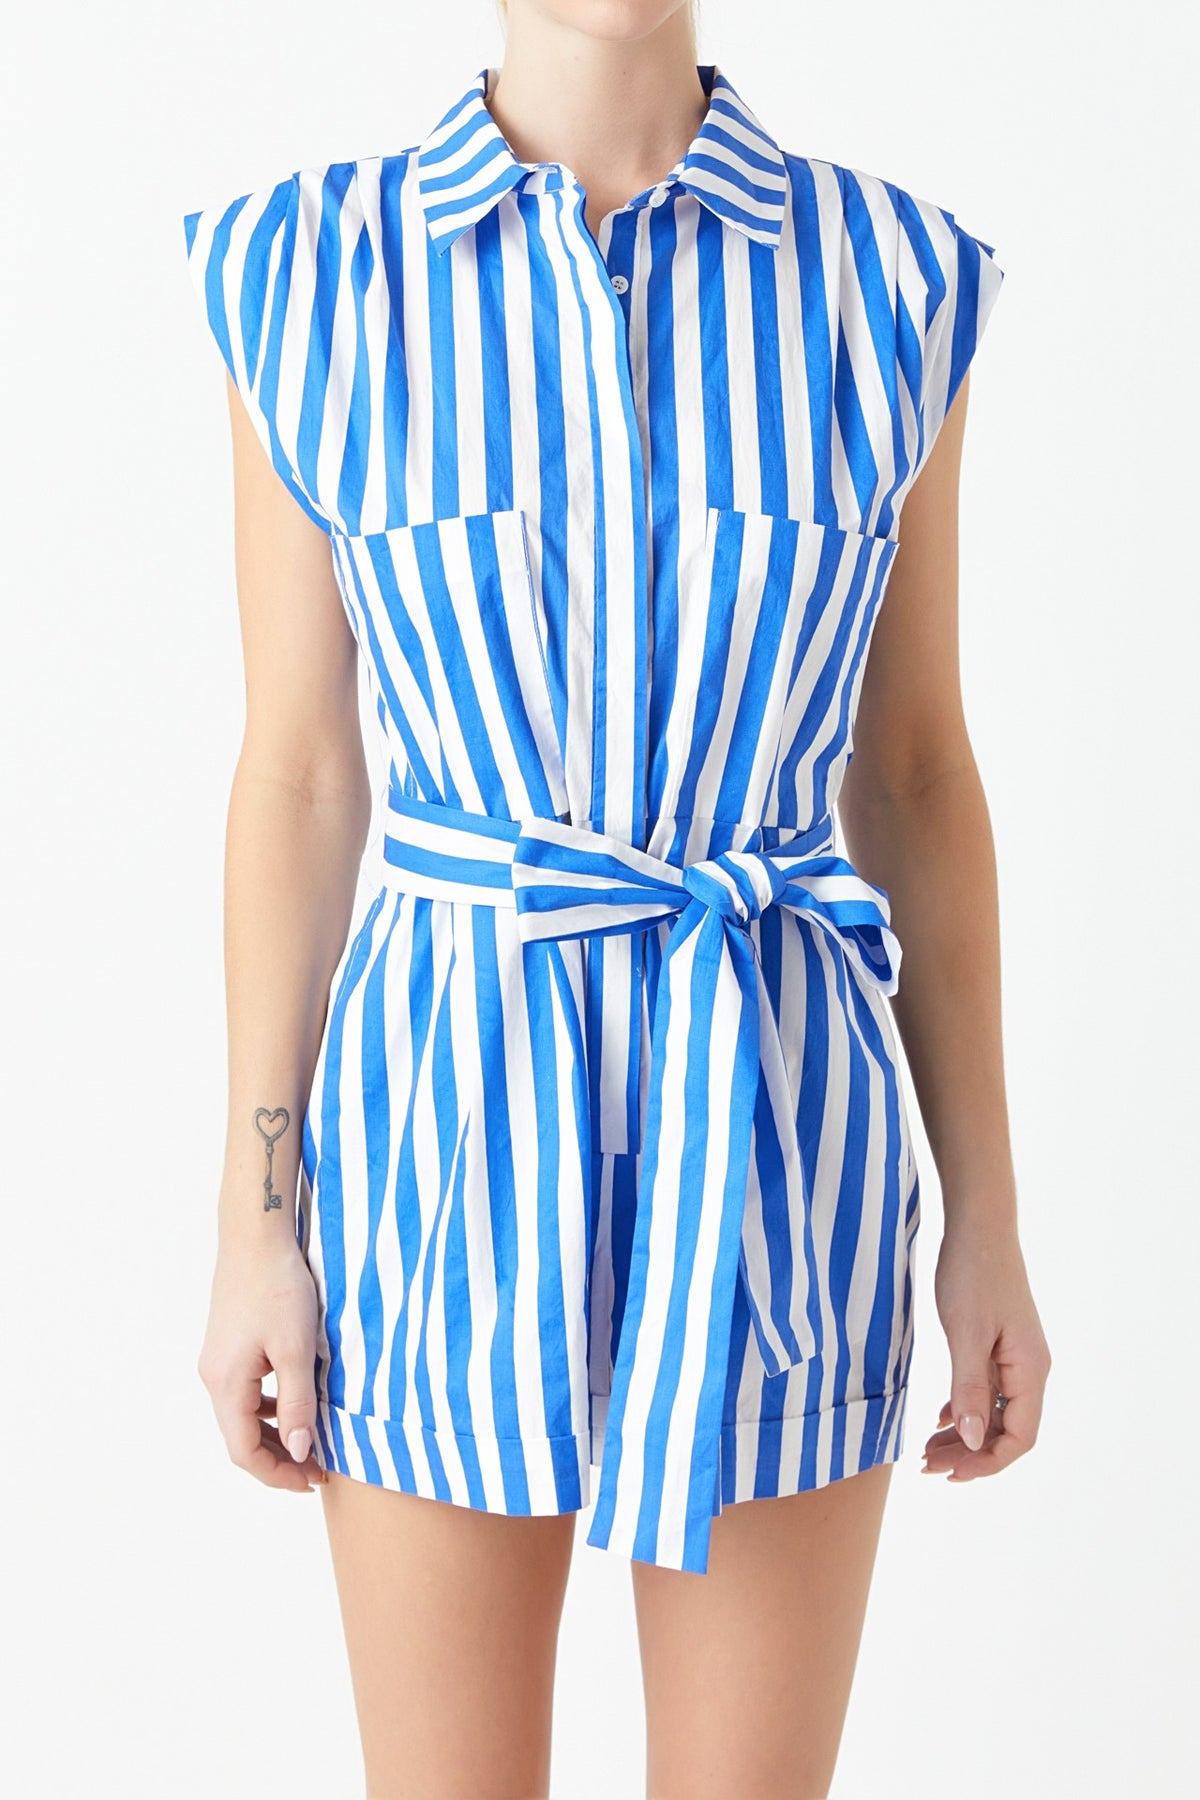 Grey Lab | Blue Striped Pintuck Romper | Sweetest Stitch Boutique